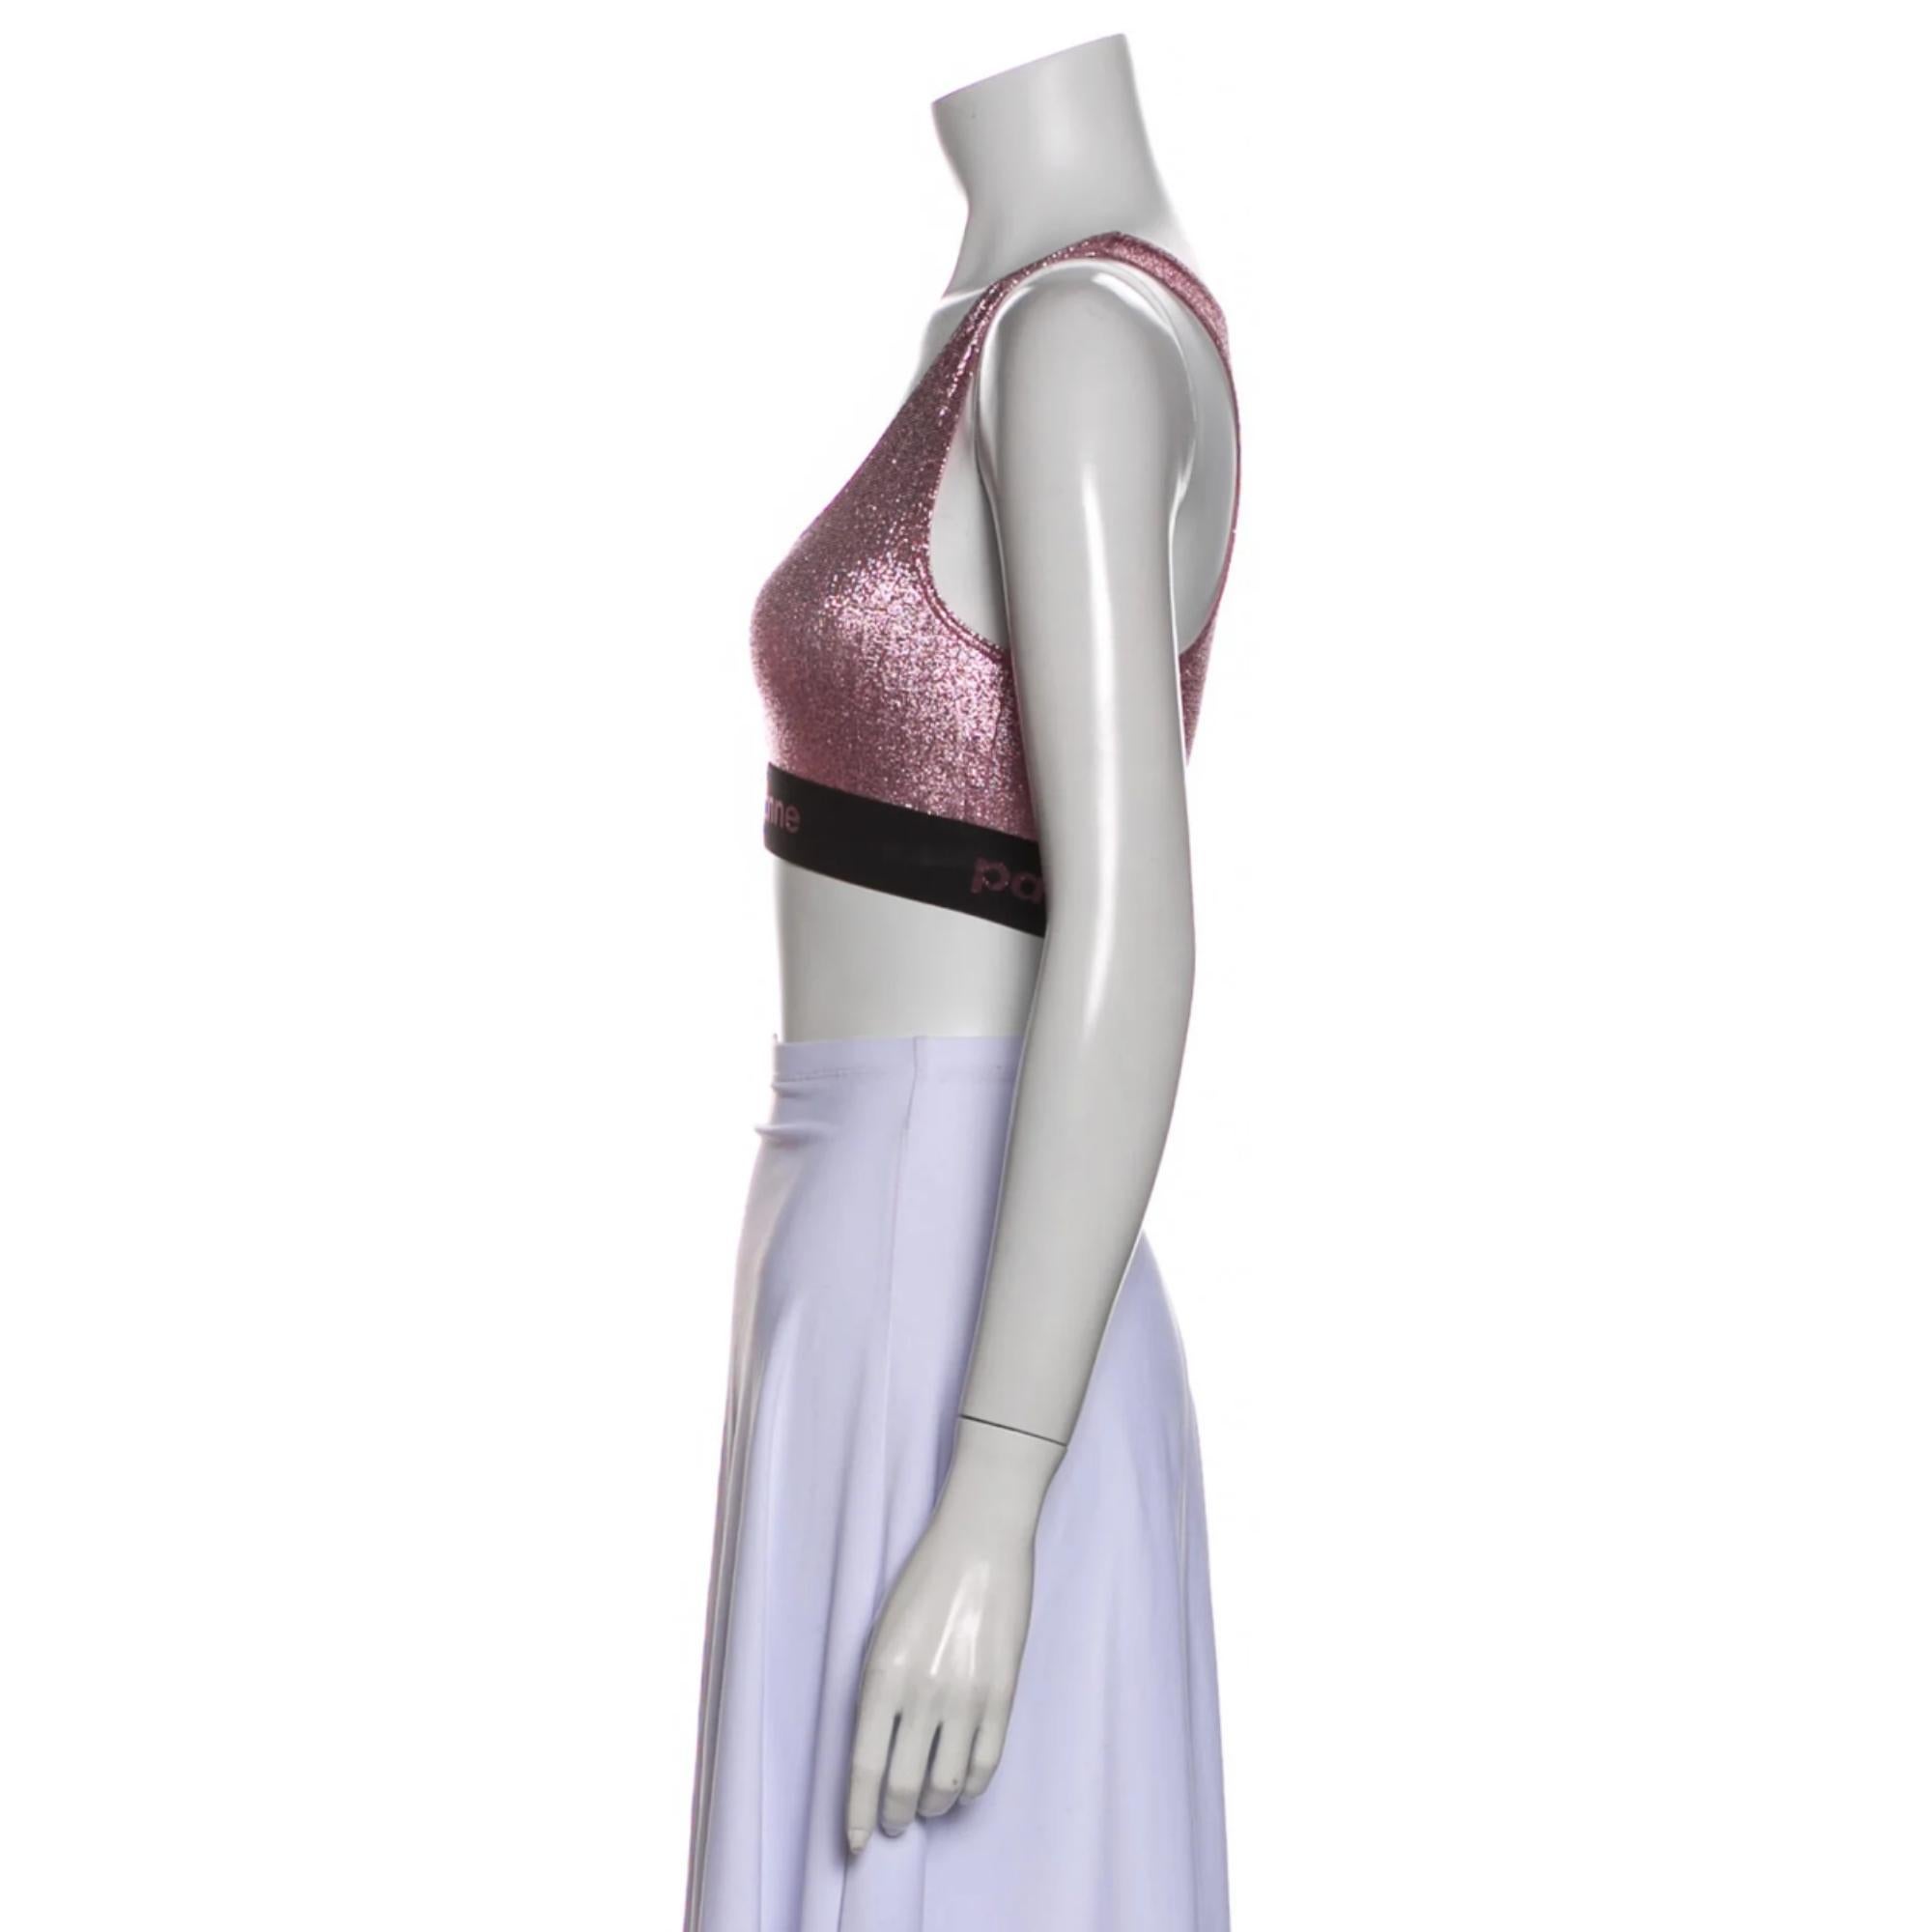 Paco Rabanne Stretch Lurex Jersey Crop Top. From the Summer 2020 Collection. Pink. Sleeveless with Square Neckline.

COLOR: Pink
MATERIAL: Not listed, feels like synthetic blend.

SIZE: Size not listed, estimated from measurements.
MEASURES~
Bust: